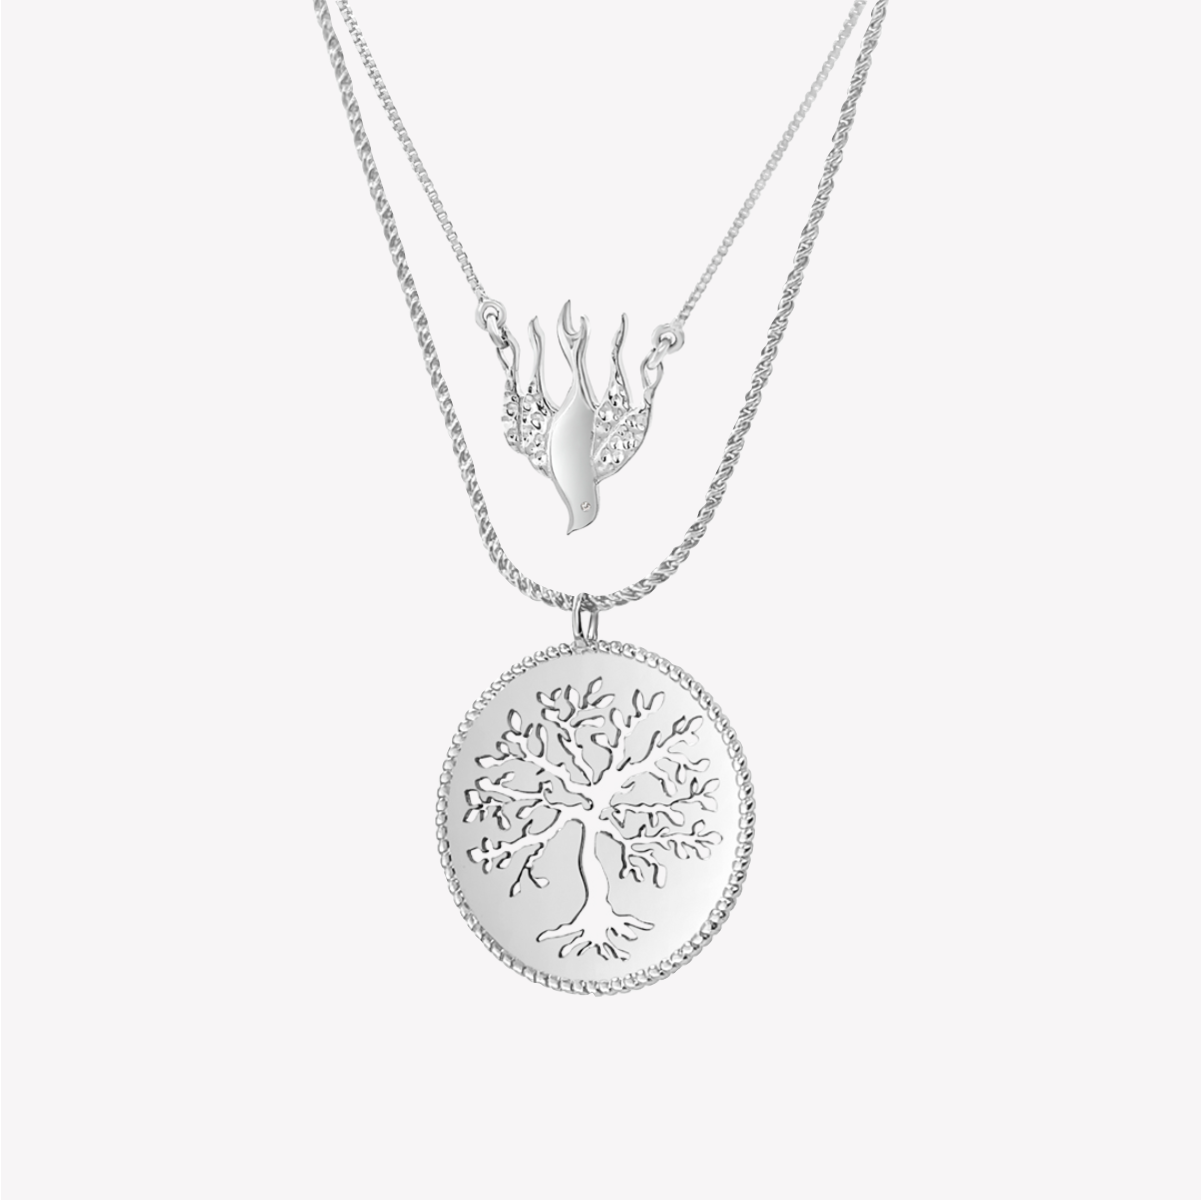 Silver Rooted in the Spirit Necklace jewelry set by Rizen Jewelry. Features Chispa de la dove and Olive tree necklaces. 